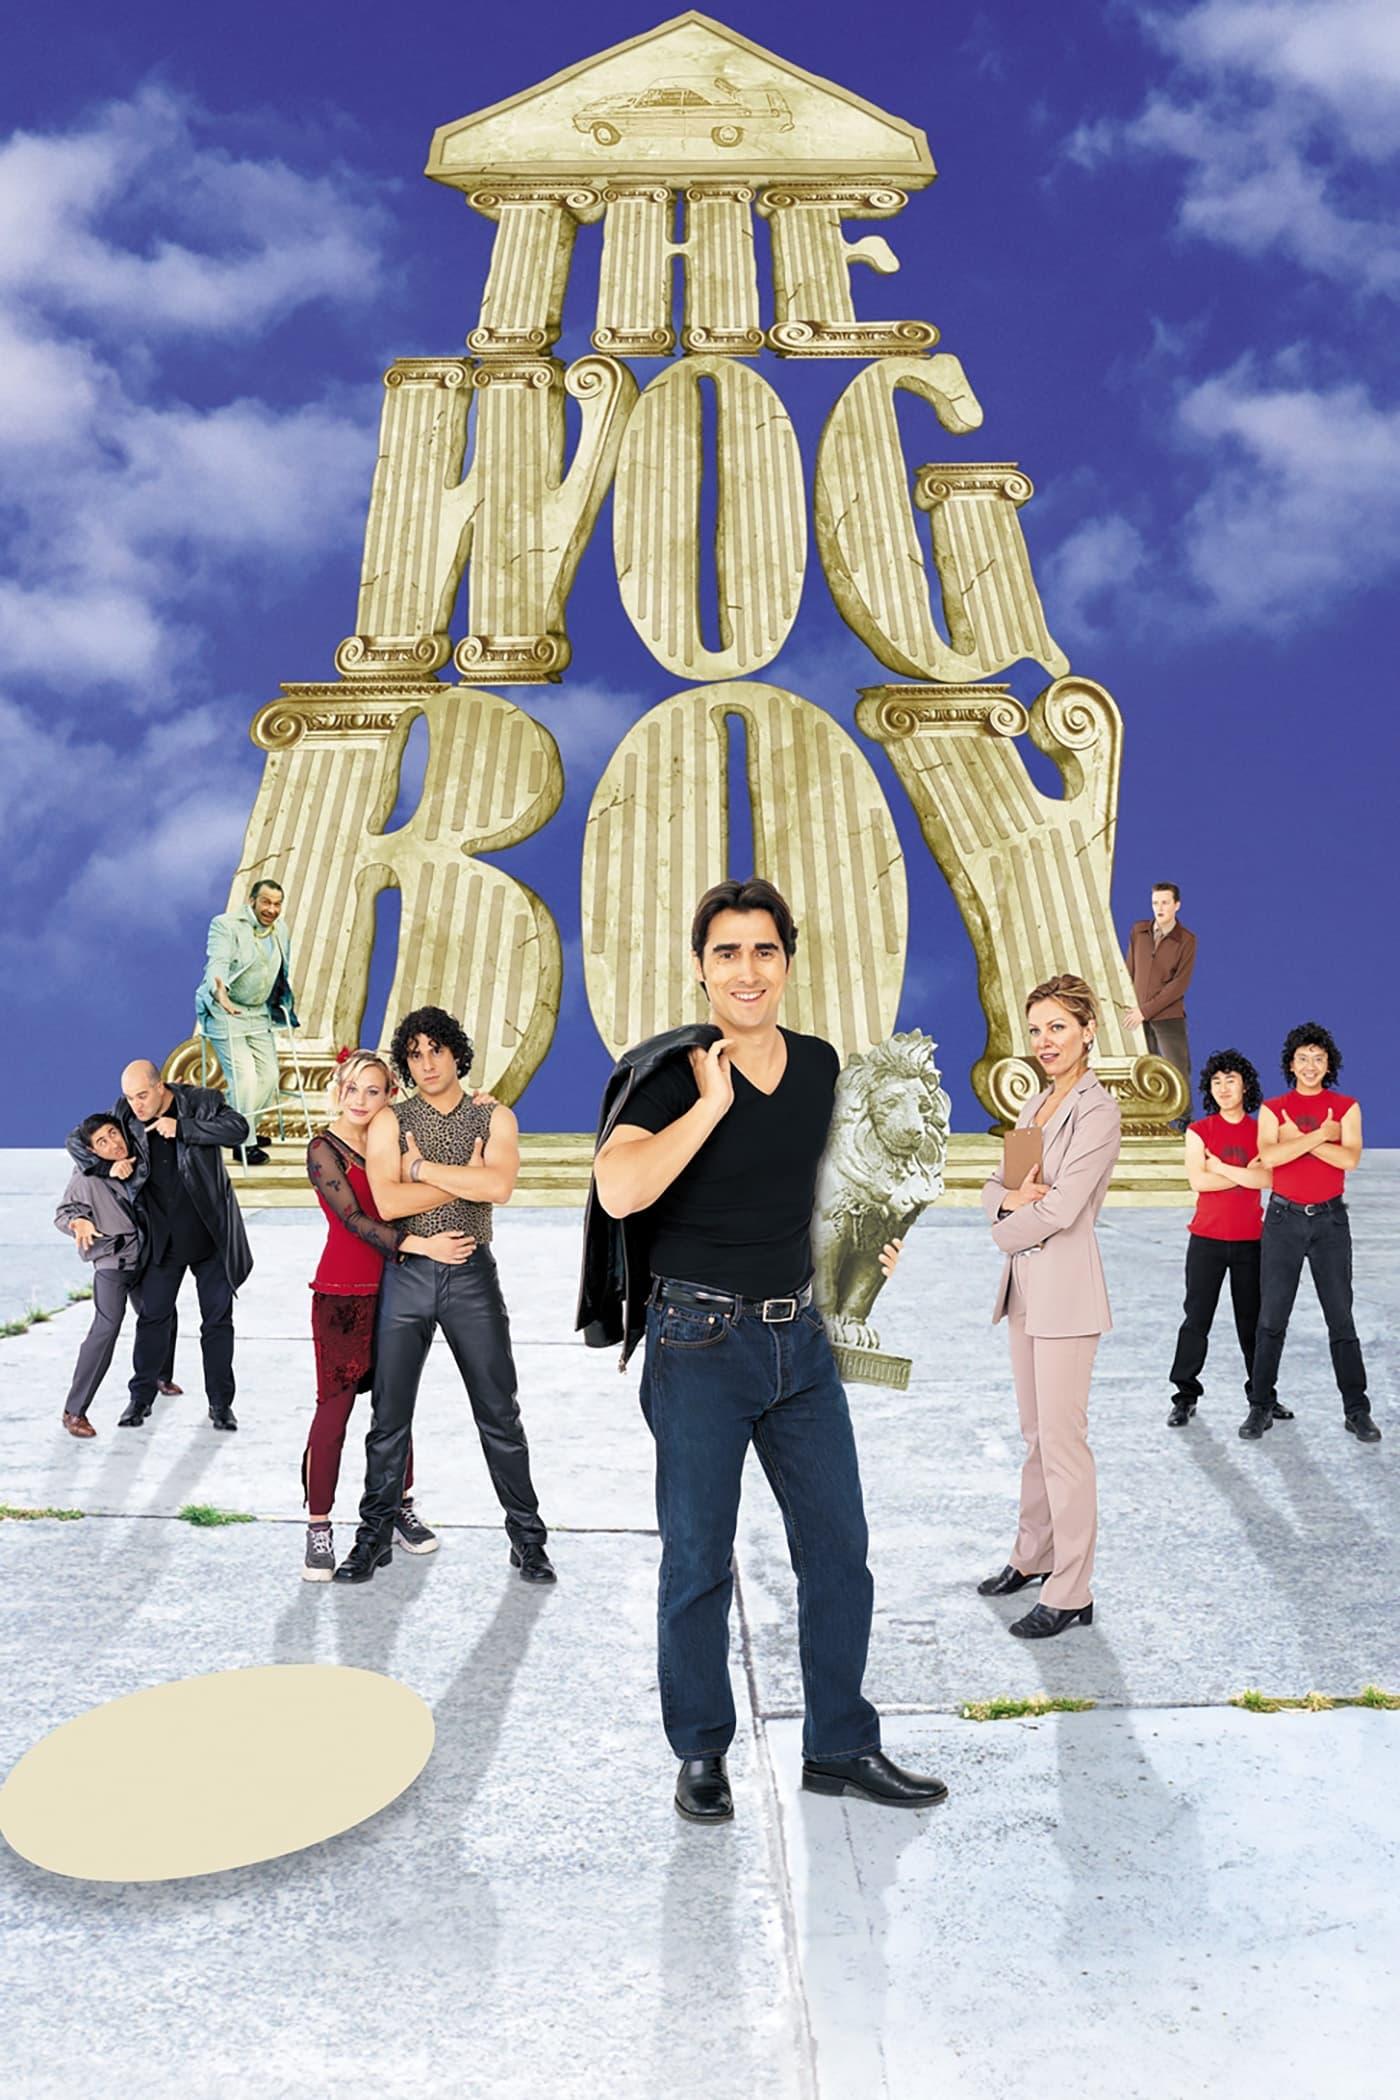 The Wog Boy poster